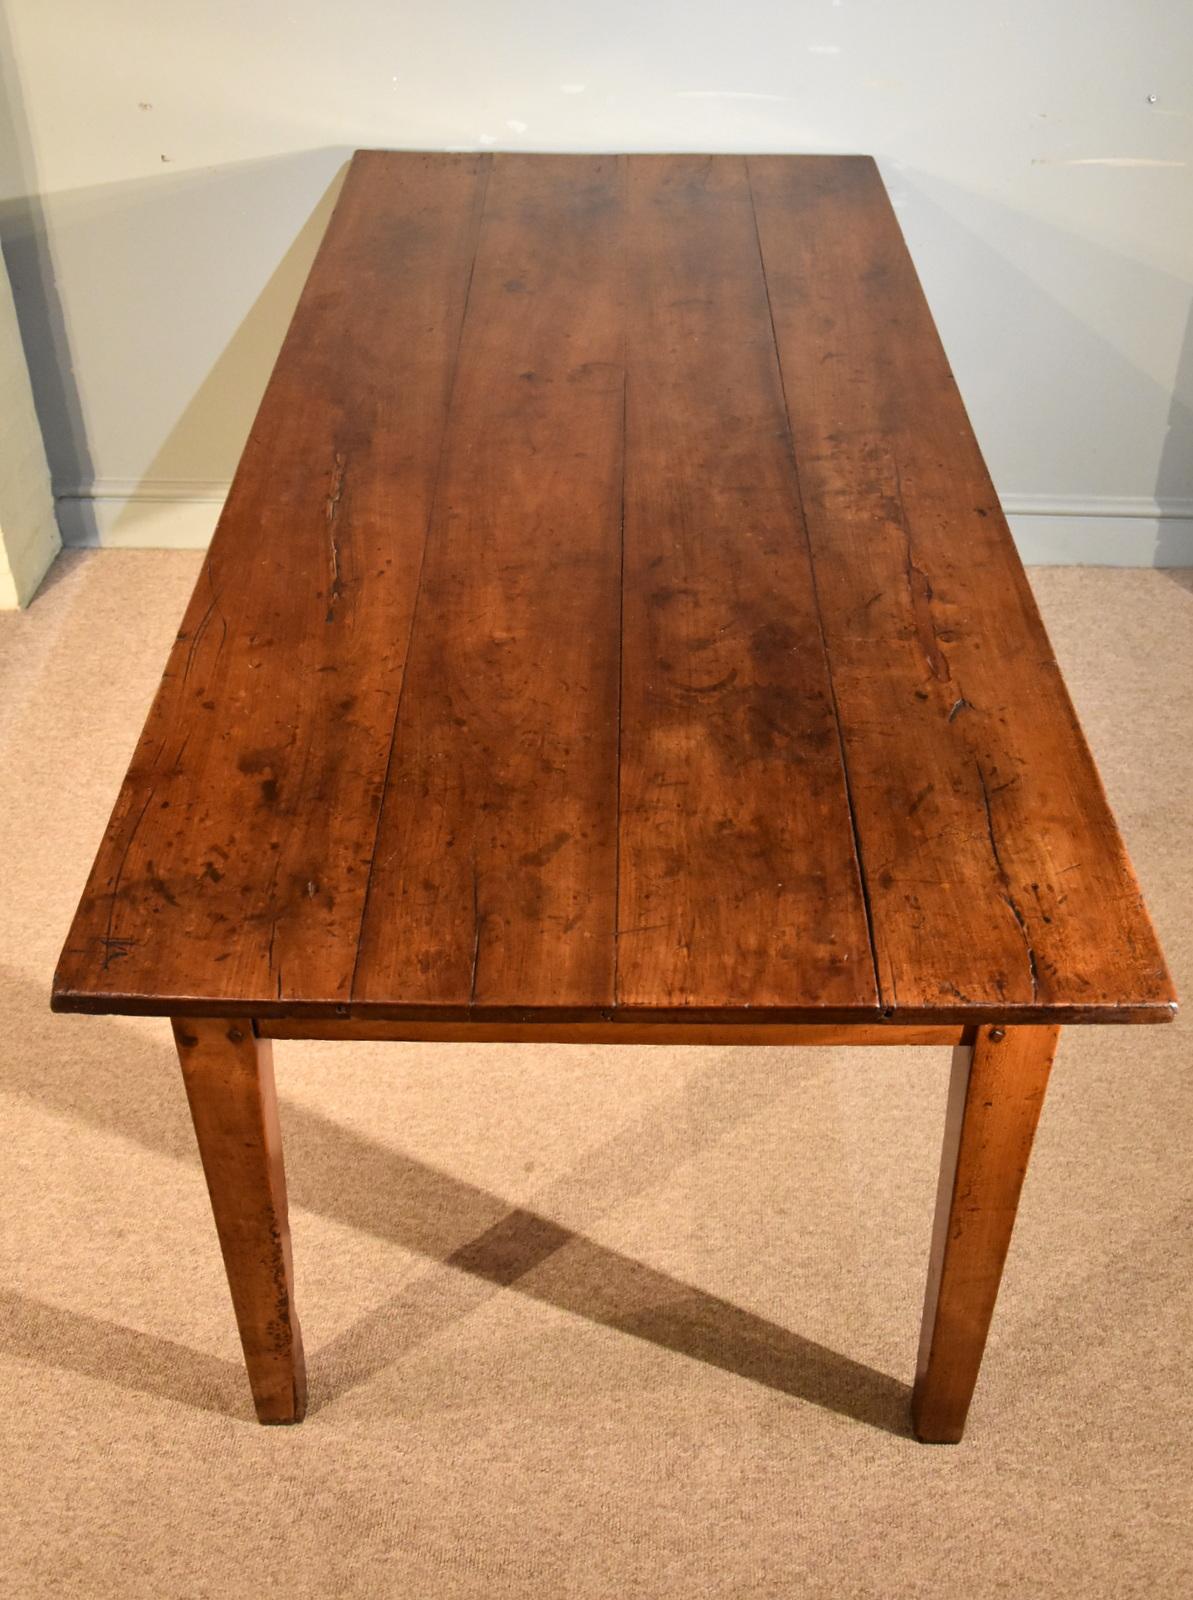 Lovely Mid-19th Century French Cherry Wood Farmhouse Table For Sale 3